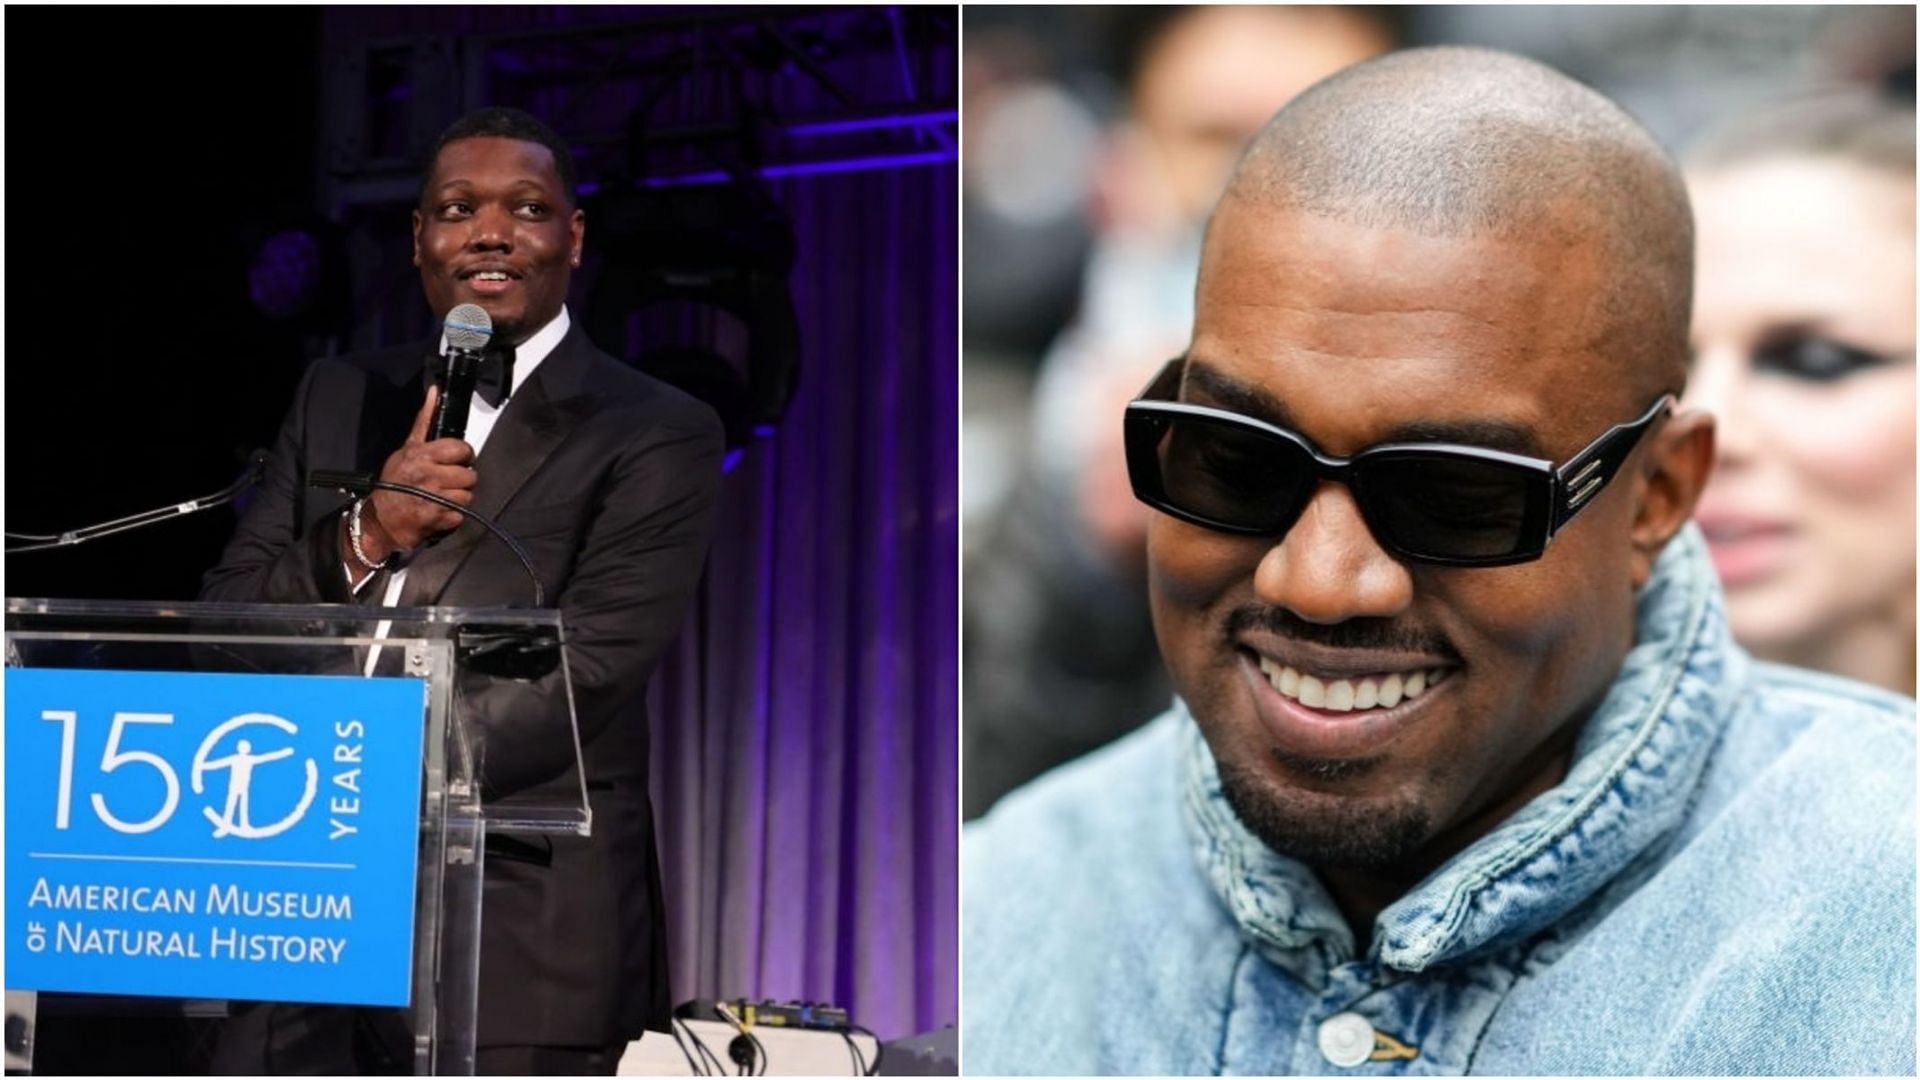 Michael Che won&#039;t accept the offer of Kanye West (Images via Theo Wargo and Edward Berthelot/Getty Images)